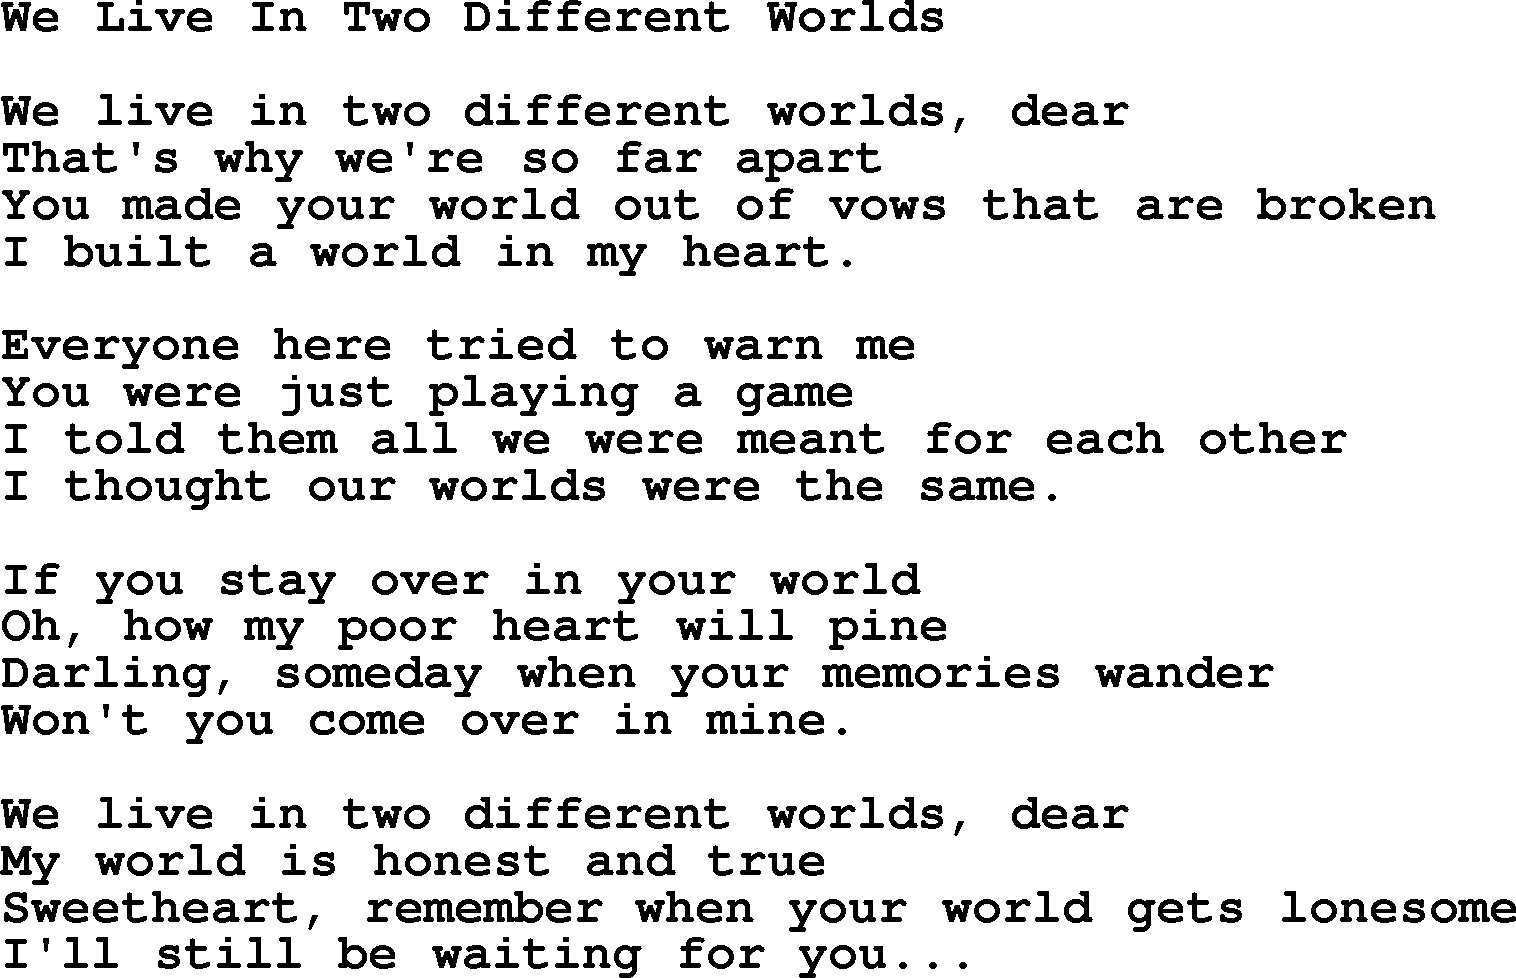 Hank Williams song We Live In Two Different Worlds, lyrics